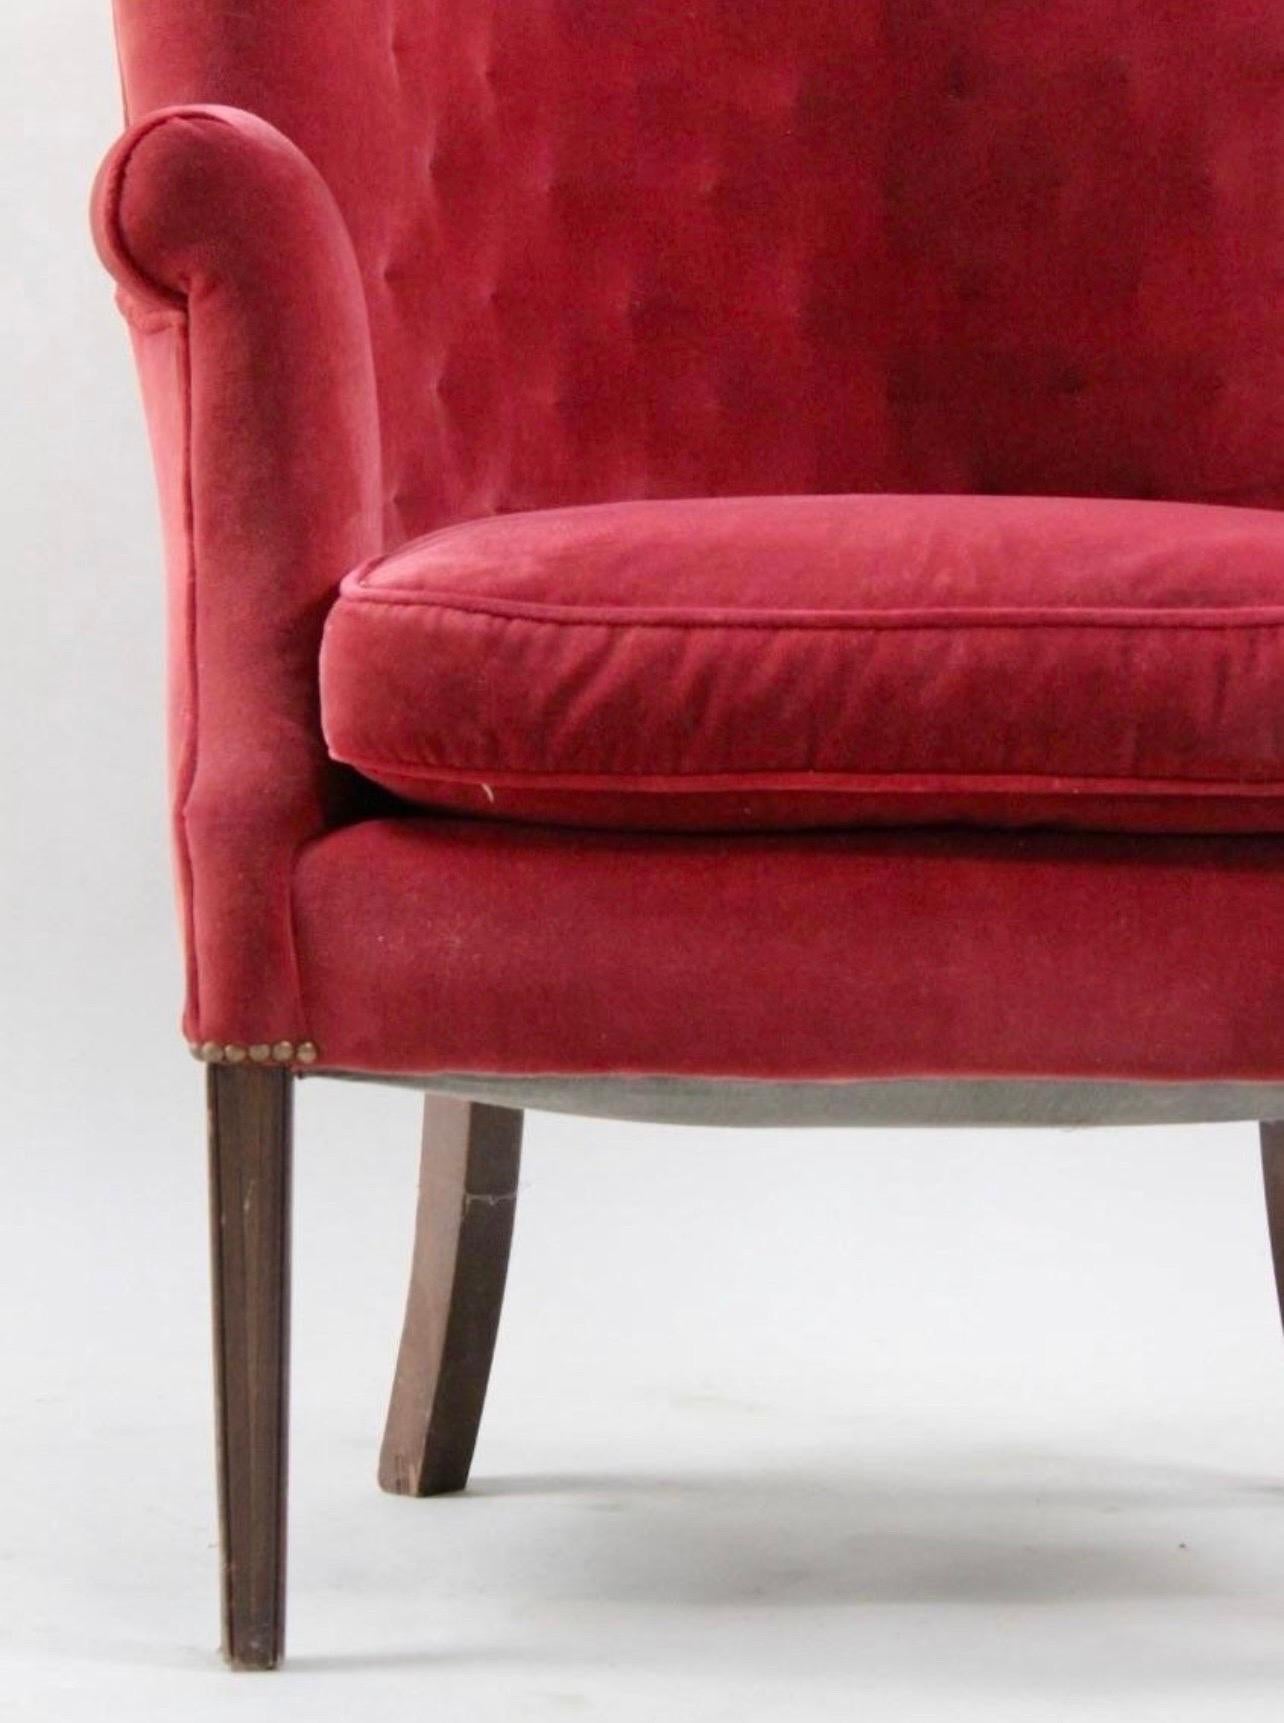 Midcentury wingback chair with vibrant red velvet upholstery. This chair becomes an instant focal point, adding a pop of color and a touch of luxury to your space. The Classic wingback design offers both style and comfort, providing a cozy and